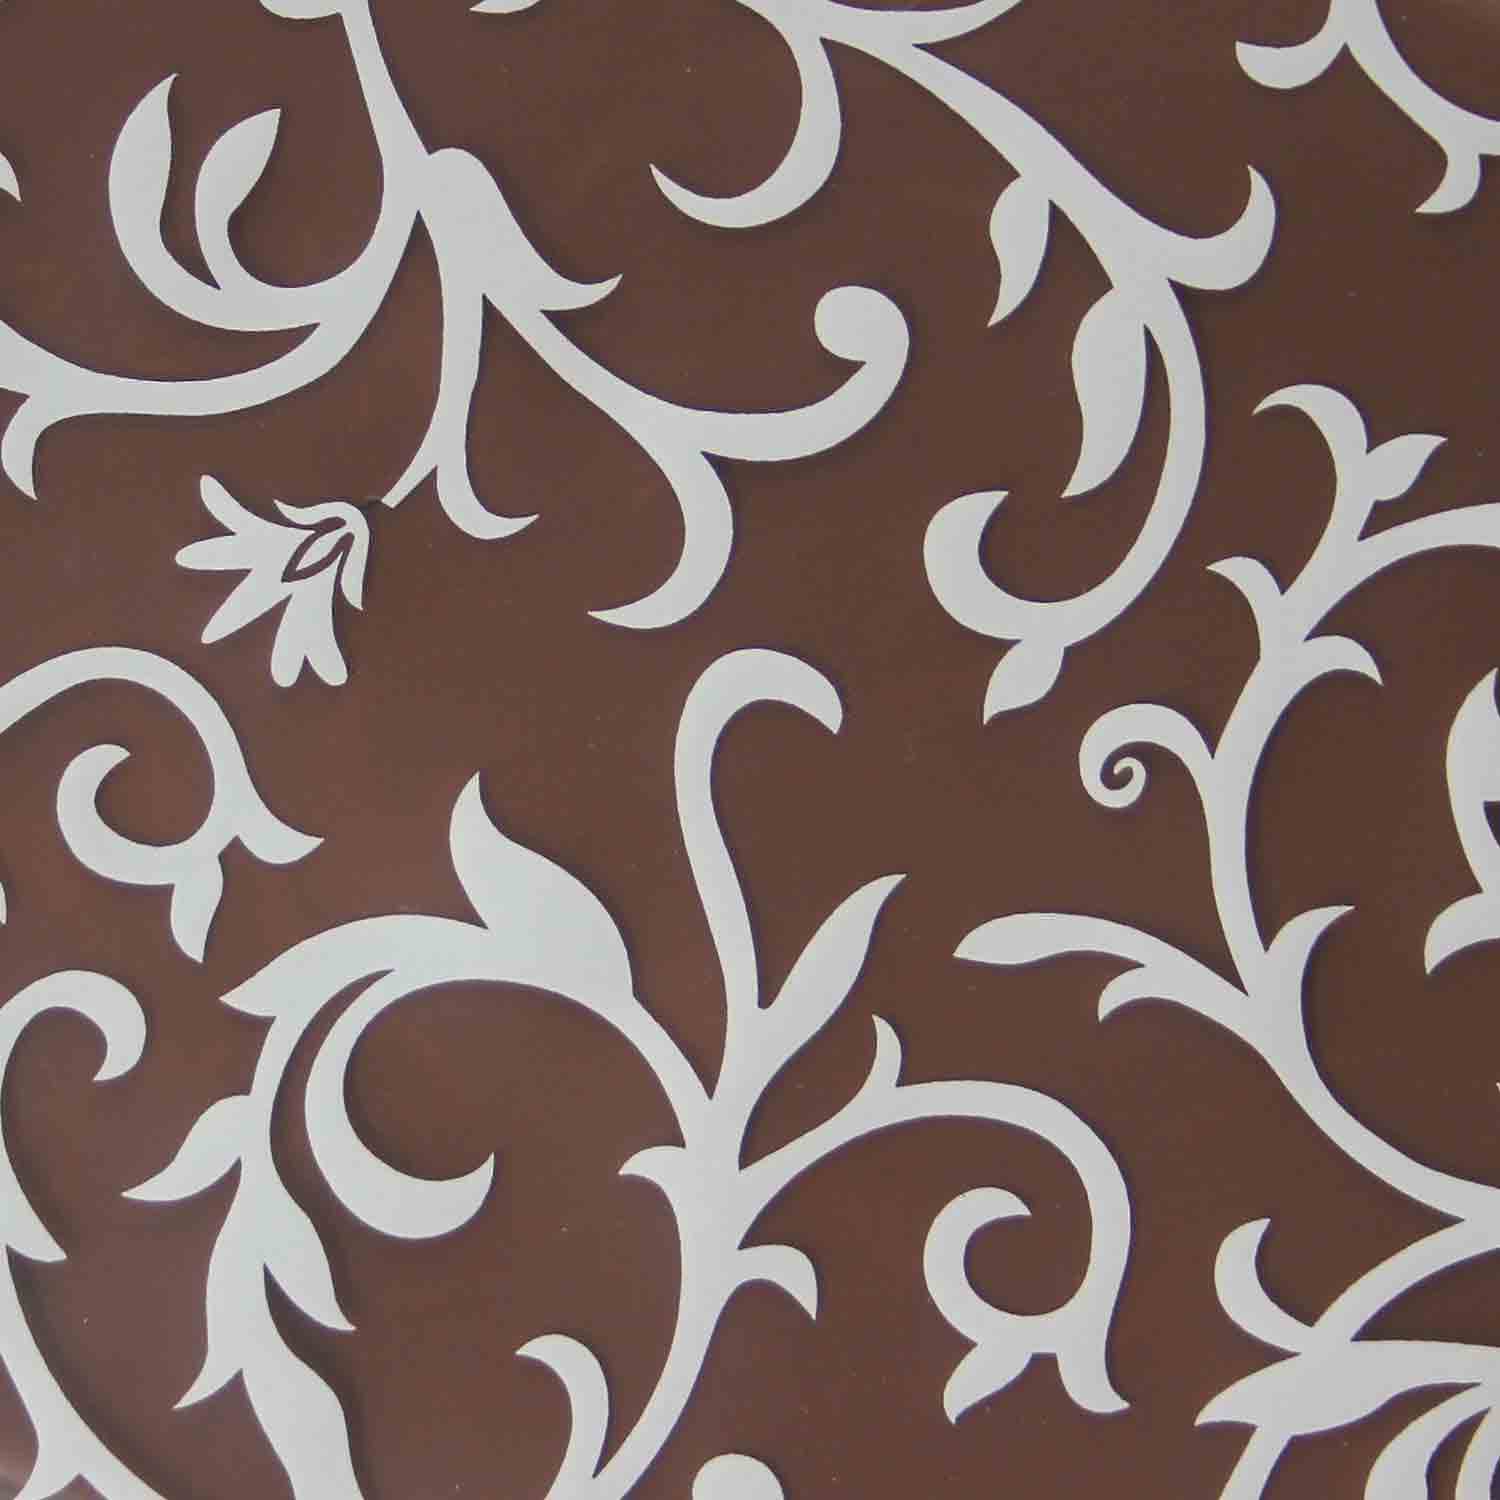  Chocolate Transfer Sheets